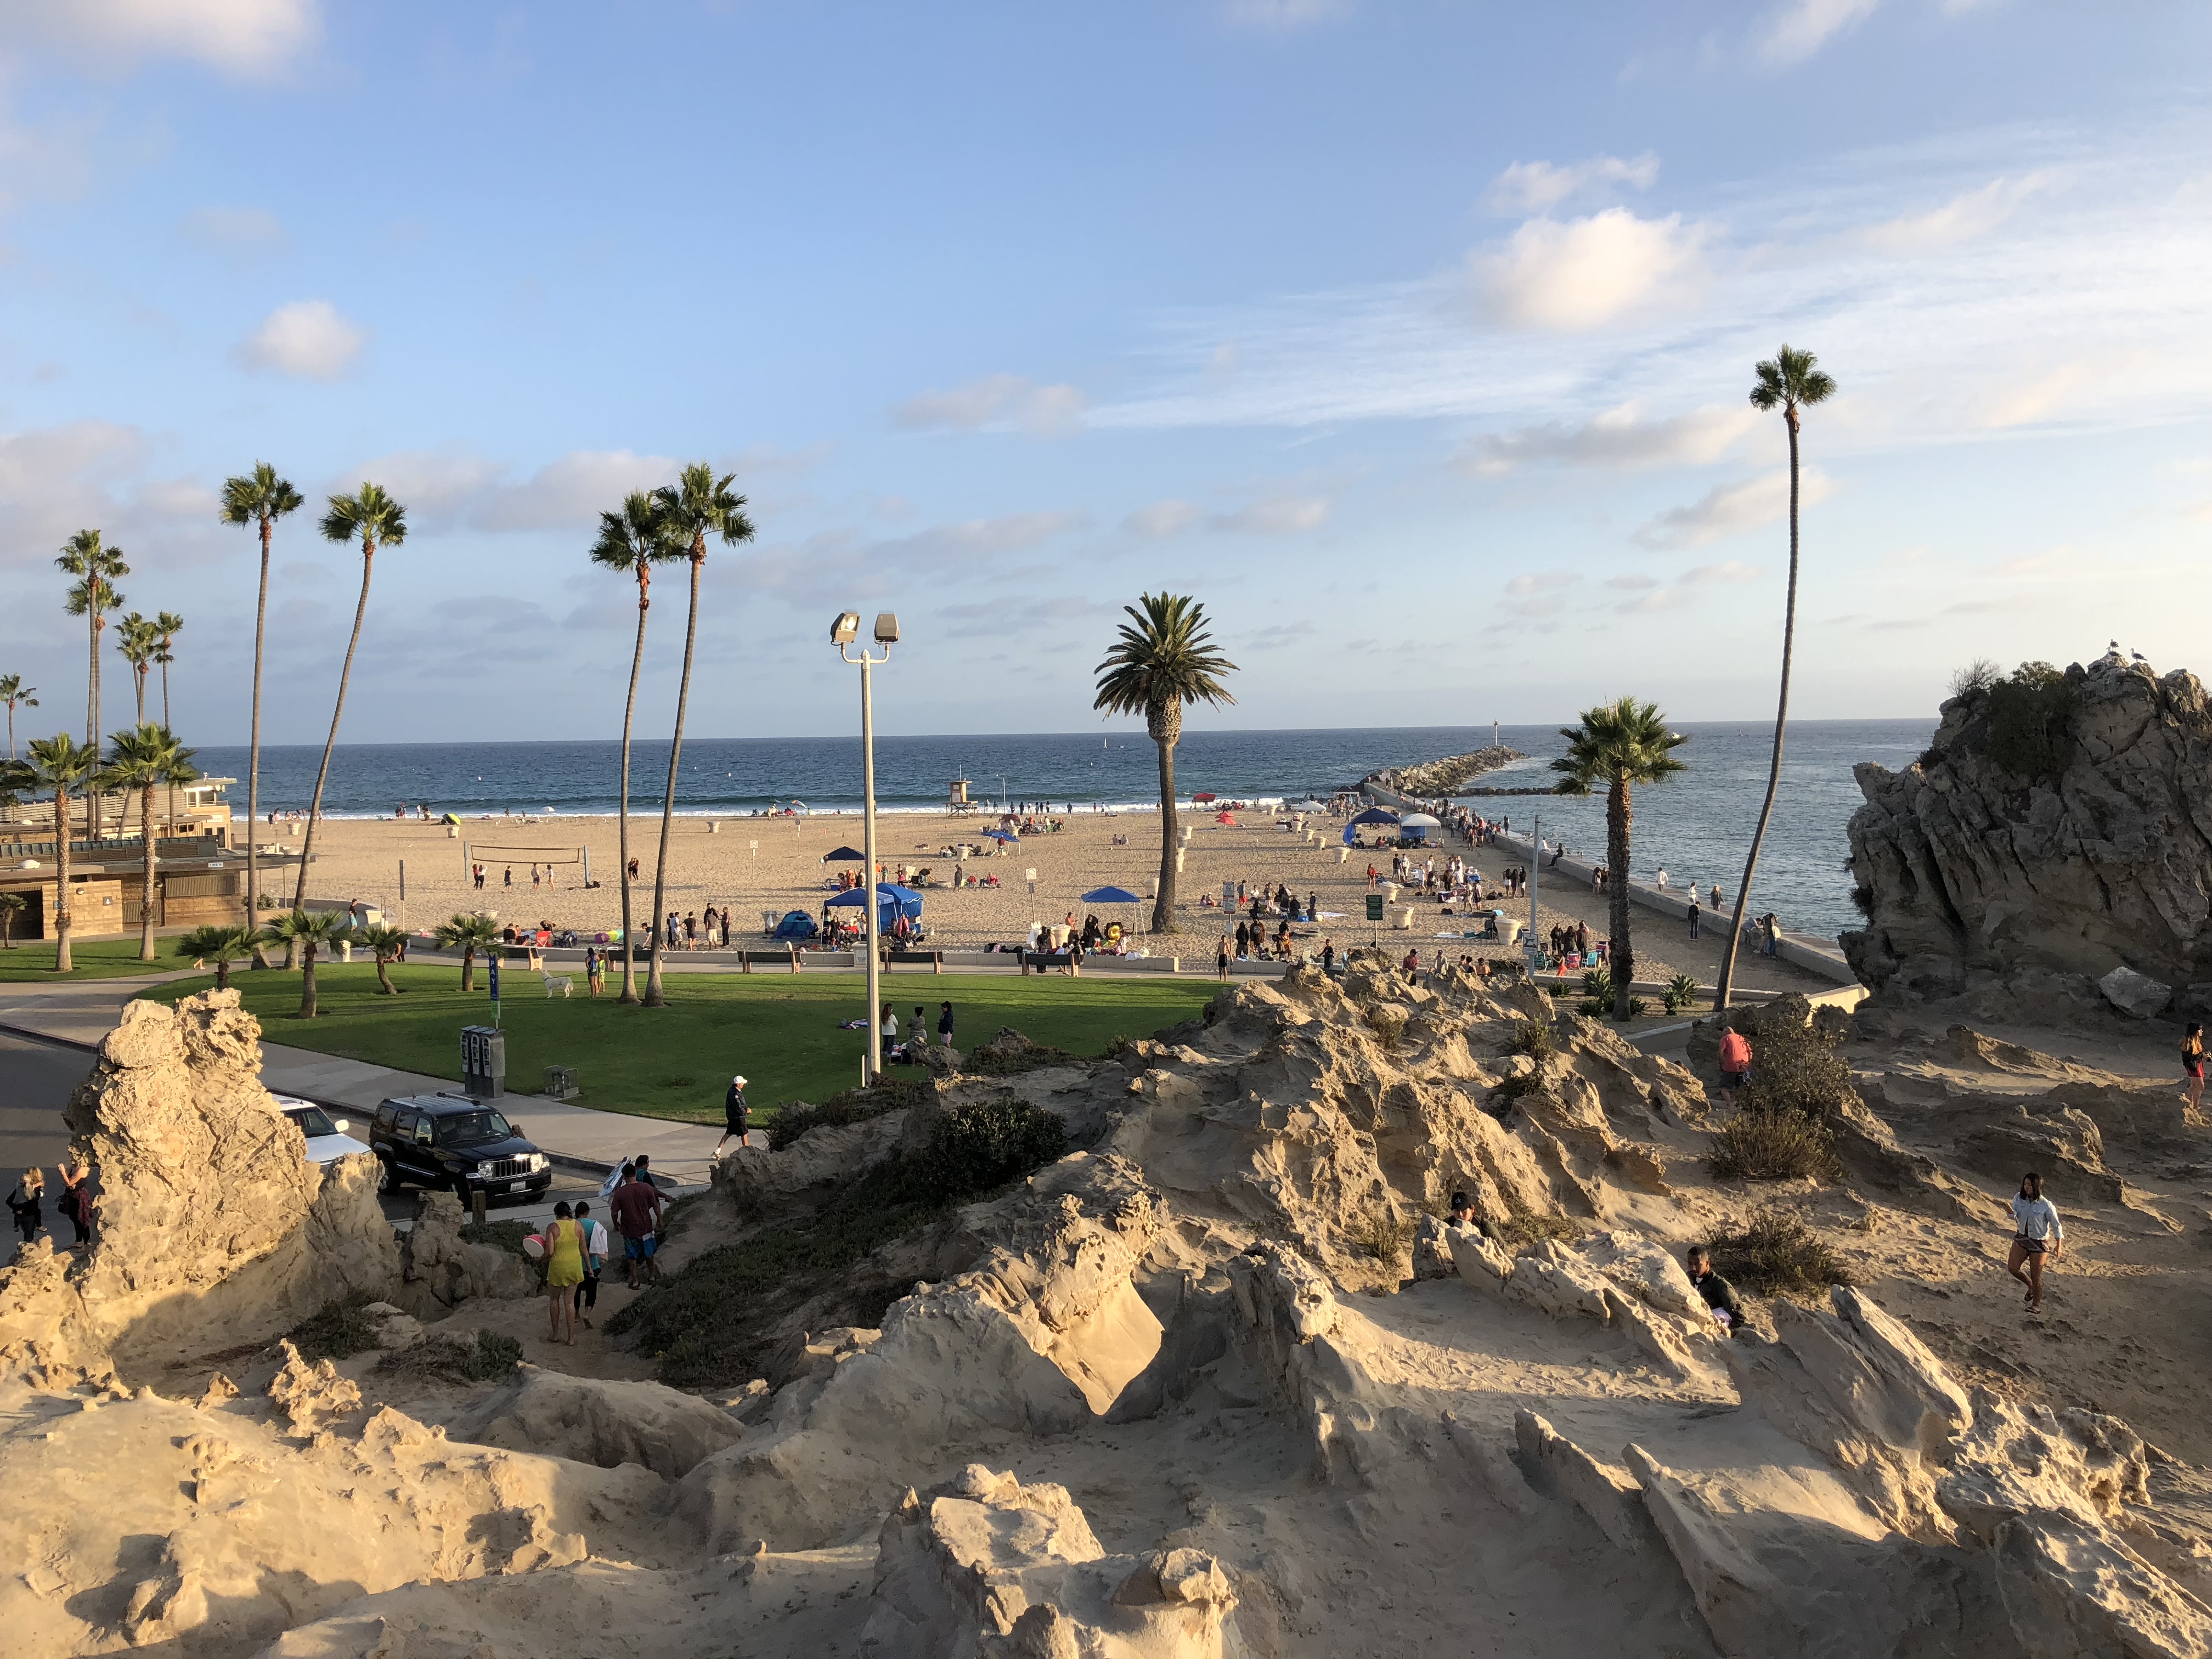 Joshua Kennon and Aaron Green at Corona del Mar State Beach on October 6, 2018 Looking Out Across the Ocean